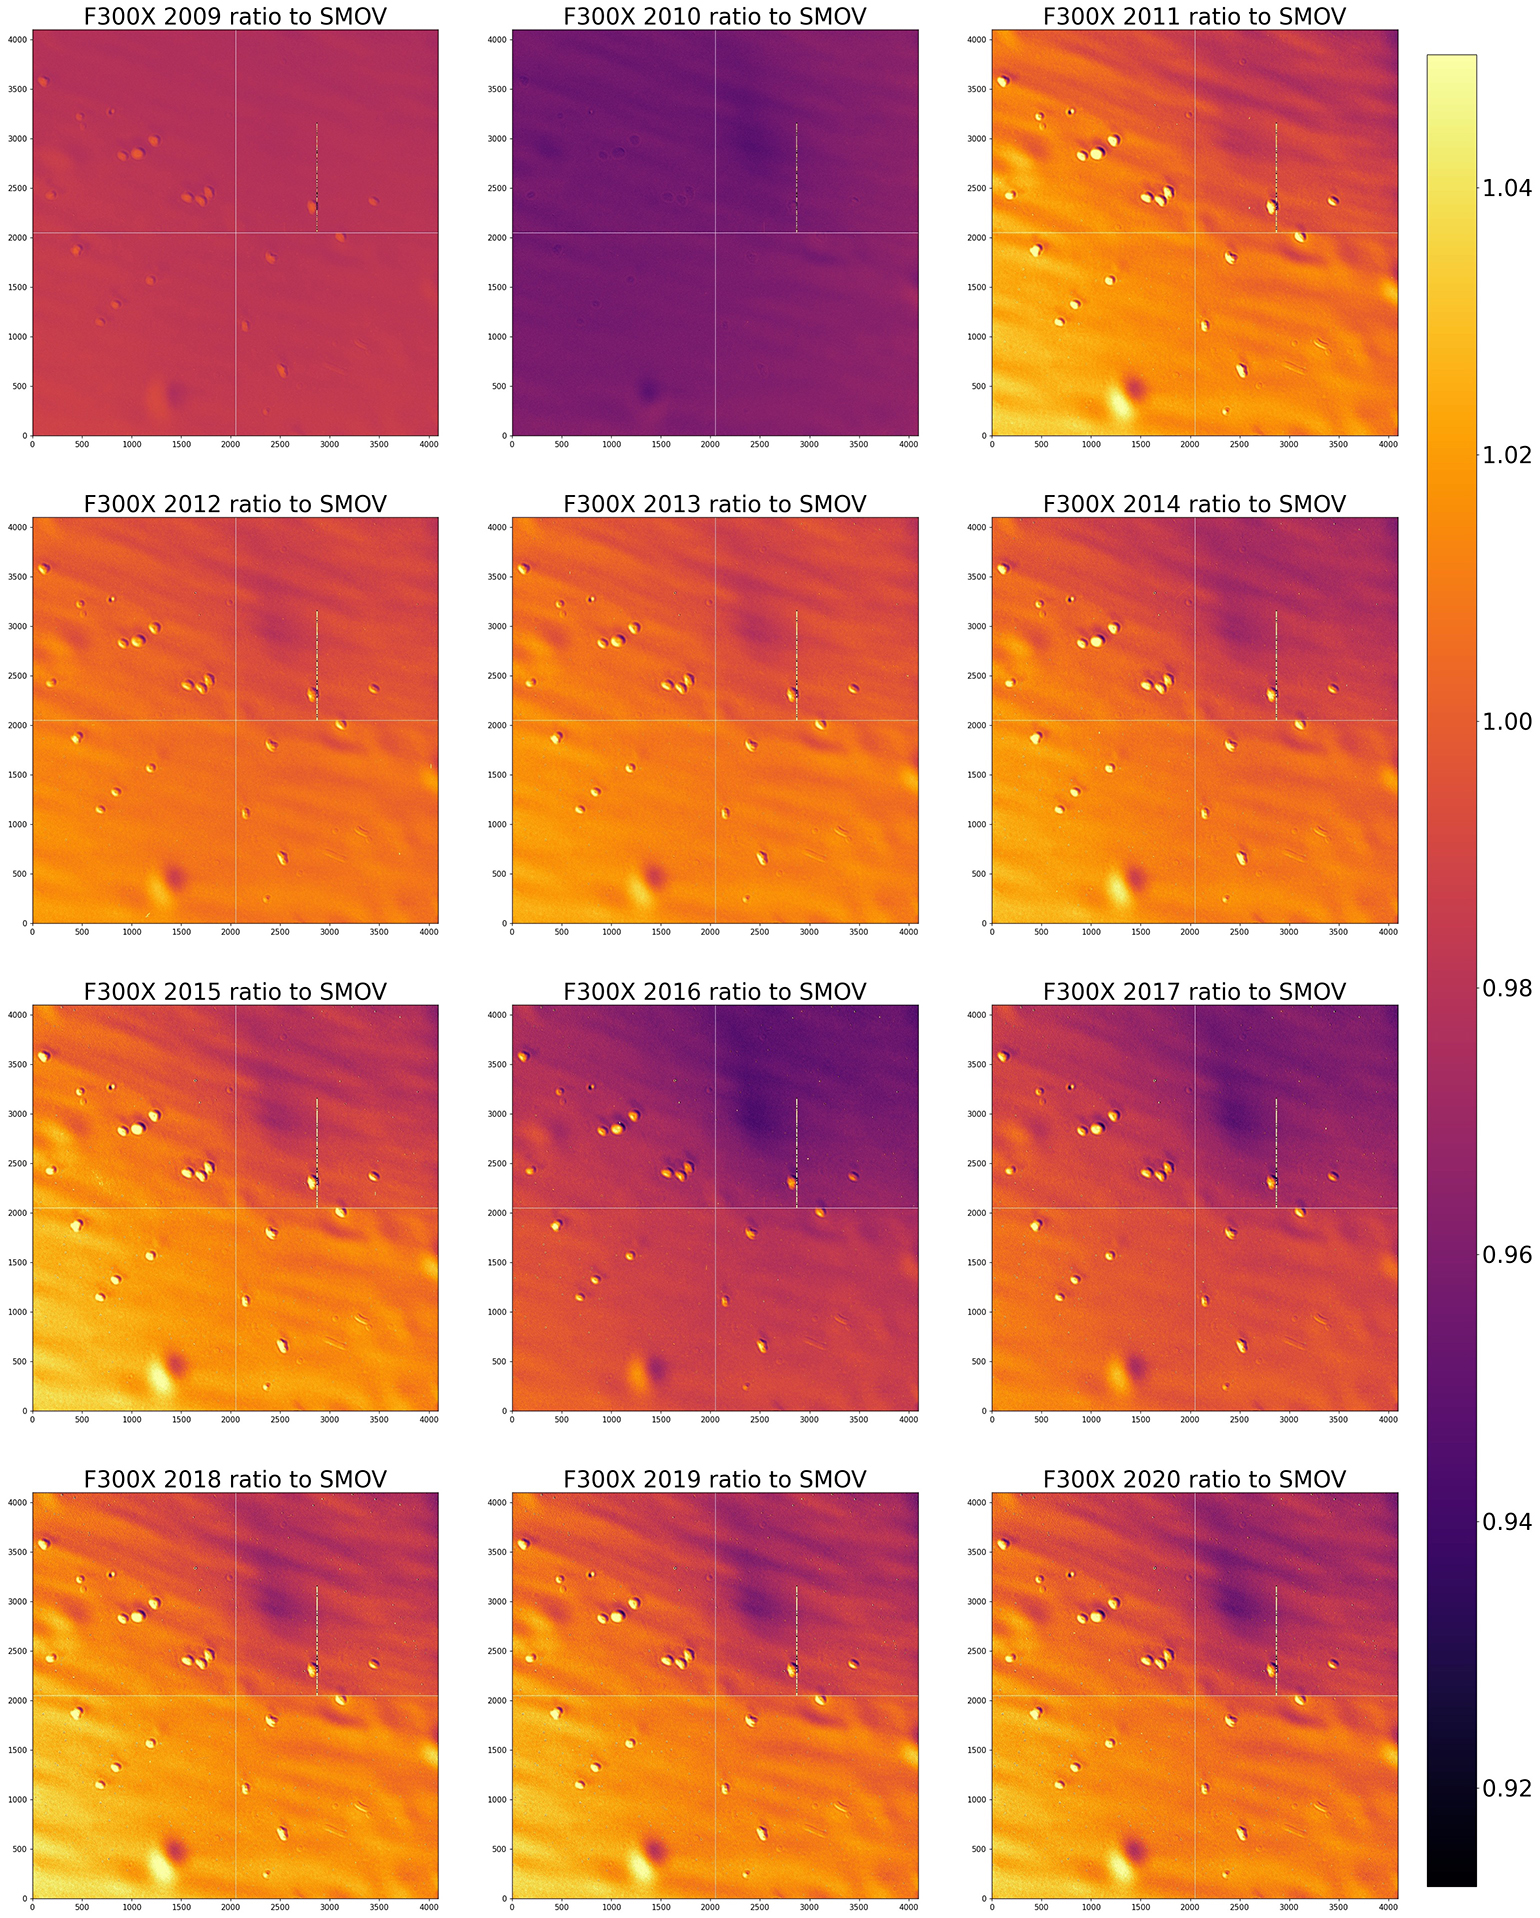 Caption for single stretch mosaic: Median combined deuterium lamp flat-field ratios normalized to SMOV for each year since WFC3 installation using a single image scaling. For presentation purposes each image has a thin white line plotted at x = 2048 and y = 2051 to separate the detector quadrants (A,B,D,C from upper left clockwise to lower left).